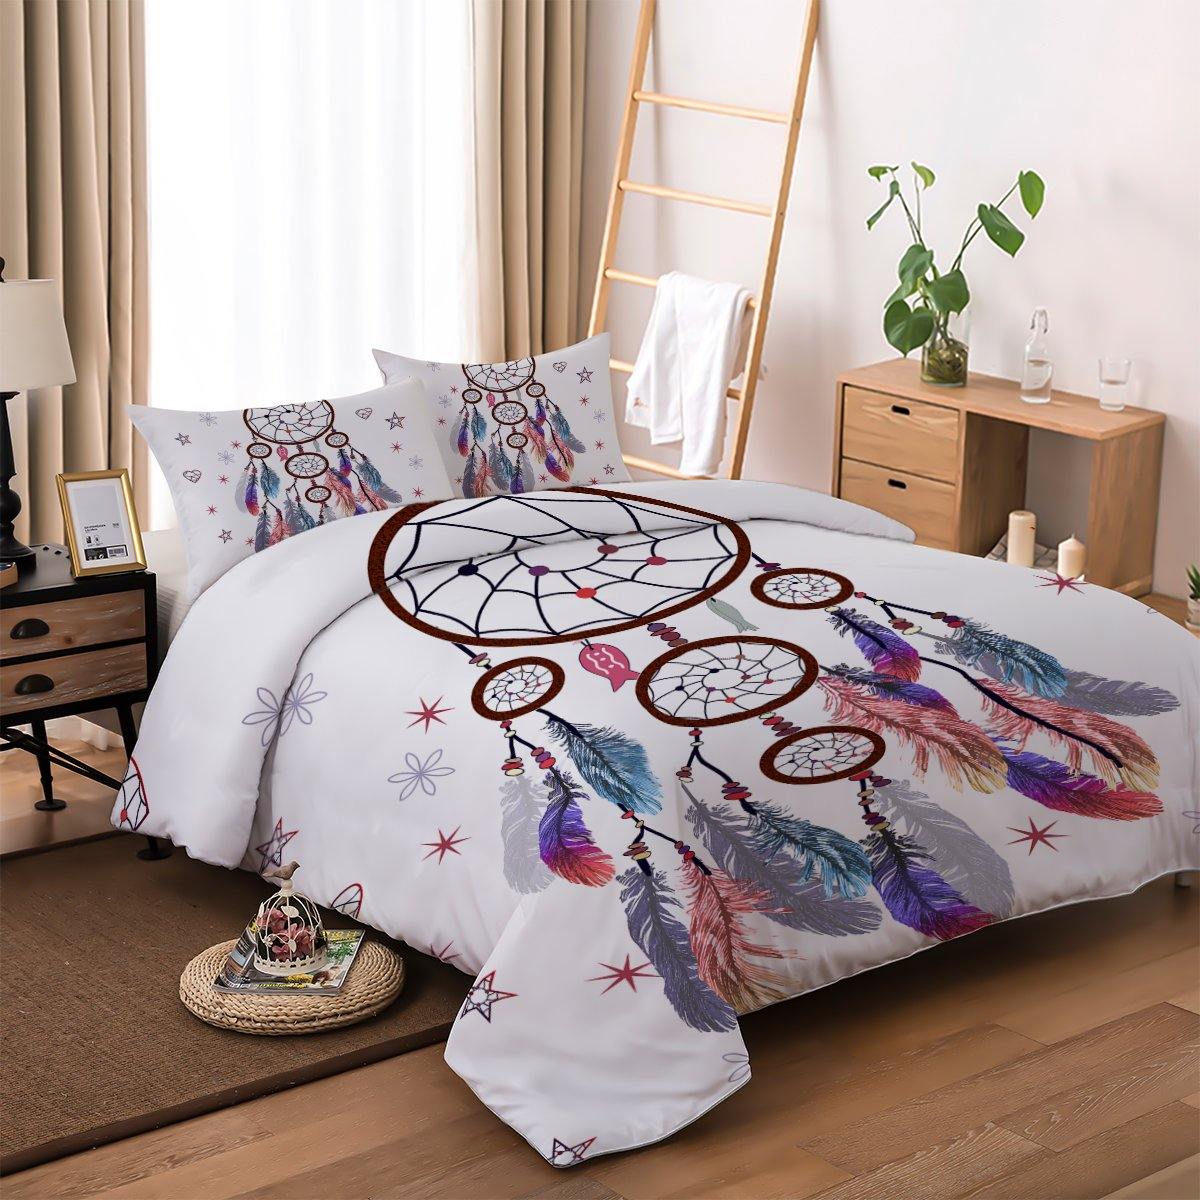 WONGS BEDDING Multi-Colored Feather Pendant Printed Bedding Bedroom Home Kit - Wongs bedding